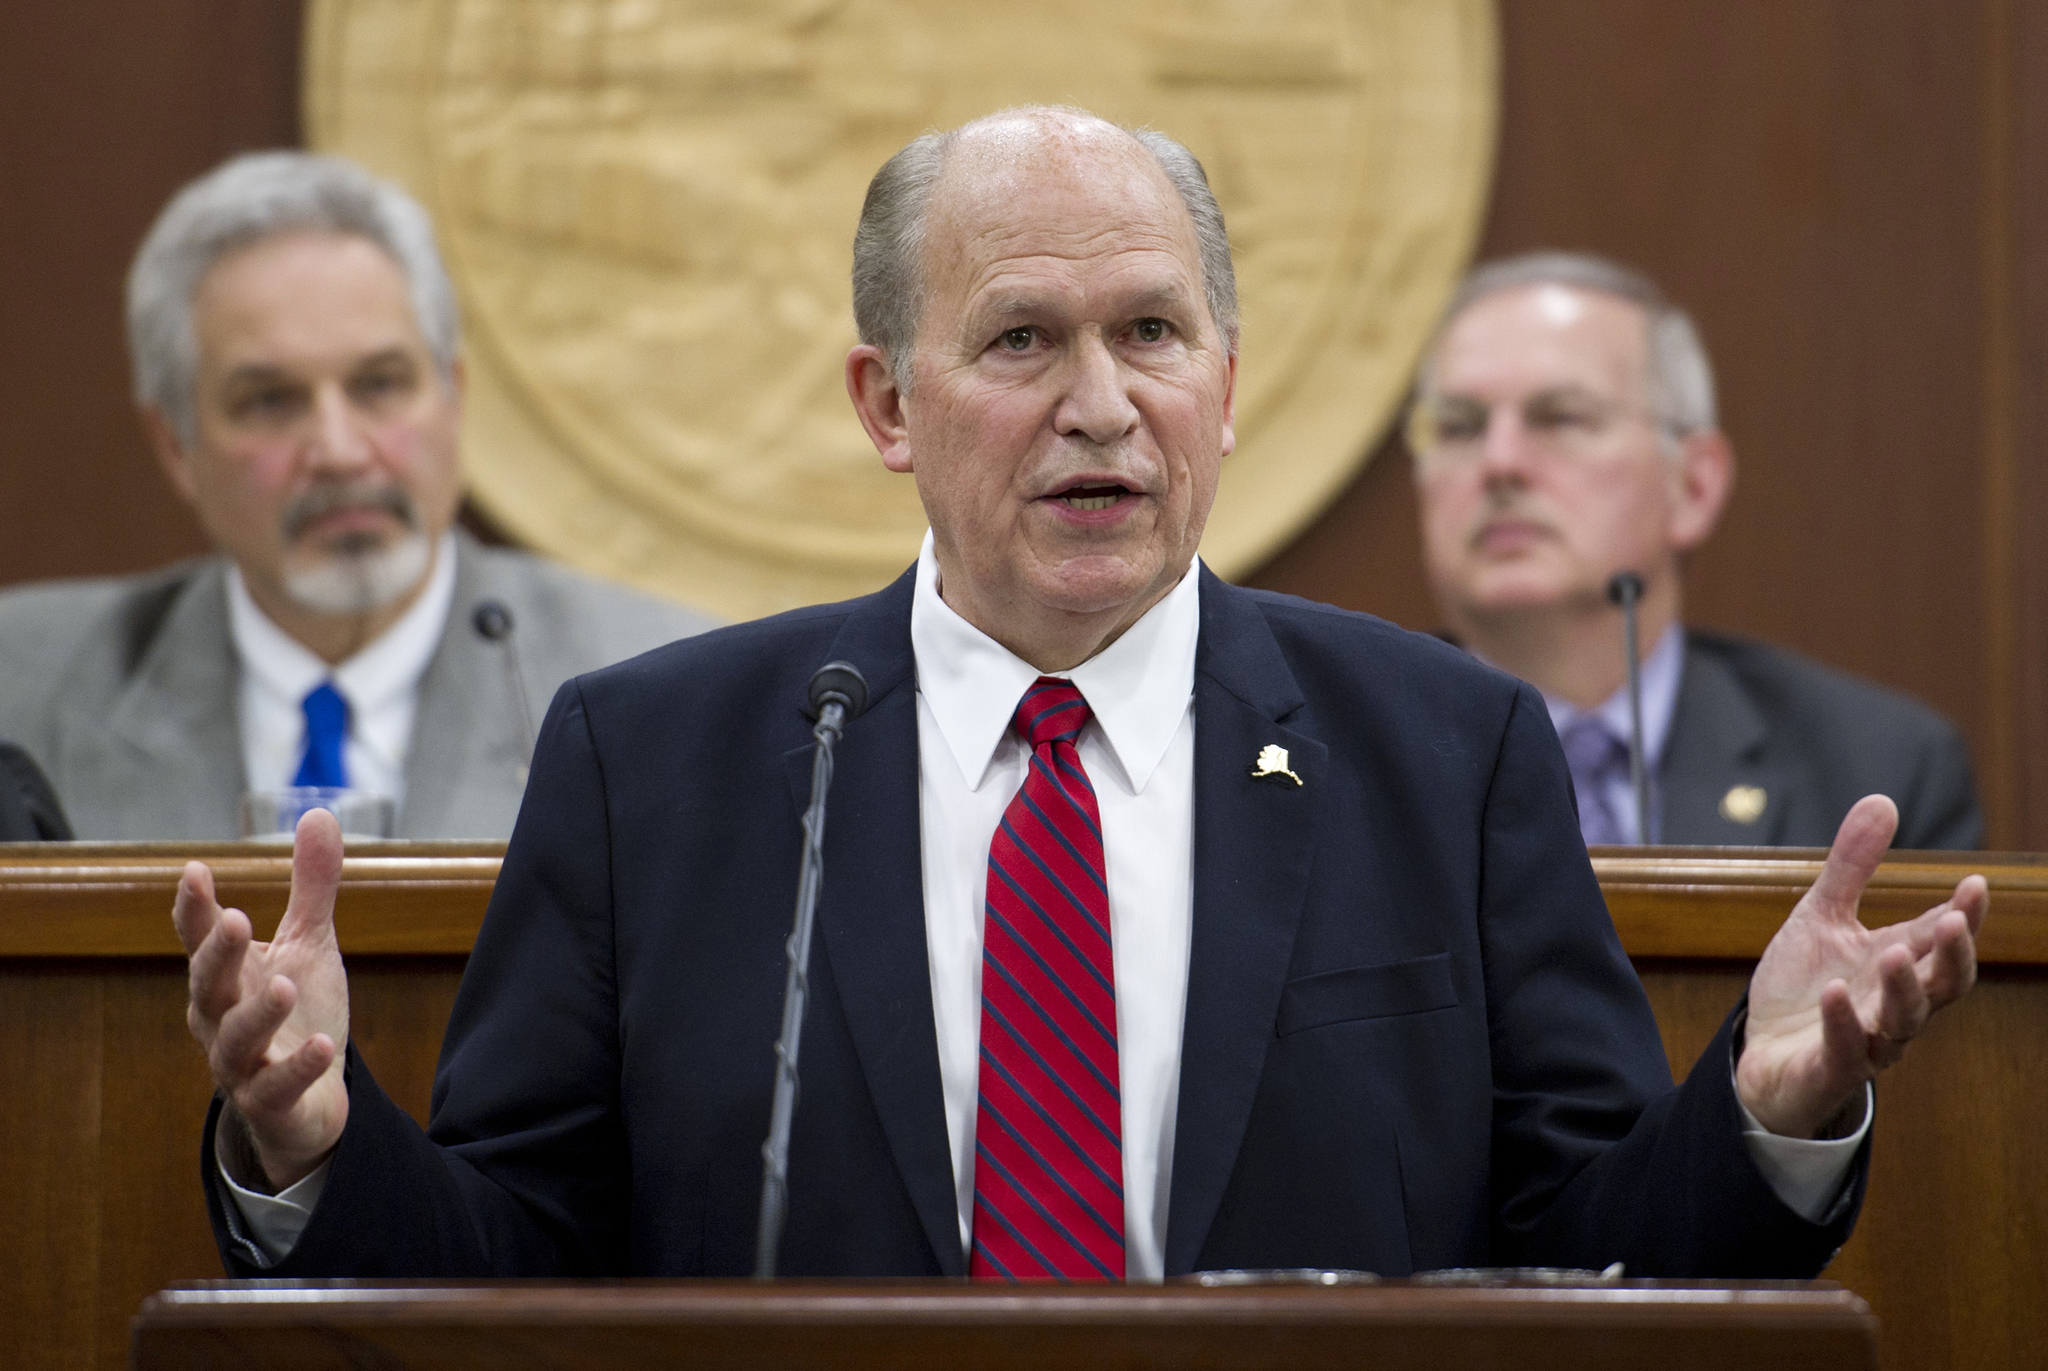 Gov. Bill Walker speaks during his State of the State address before a joint session of the Alaska Legislature at the Capitol on Wednesday. (Michael Penn | Juneau Empire)